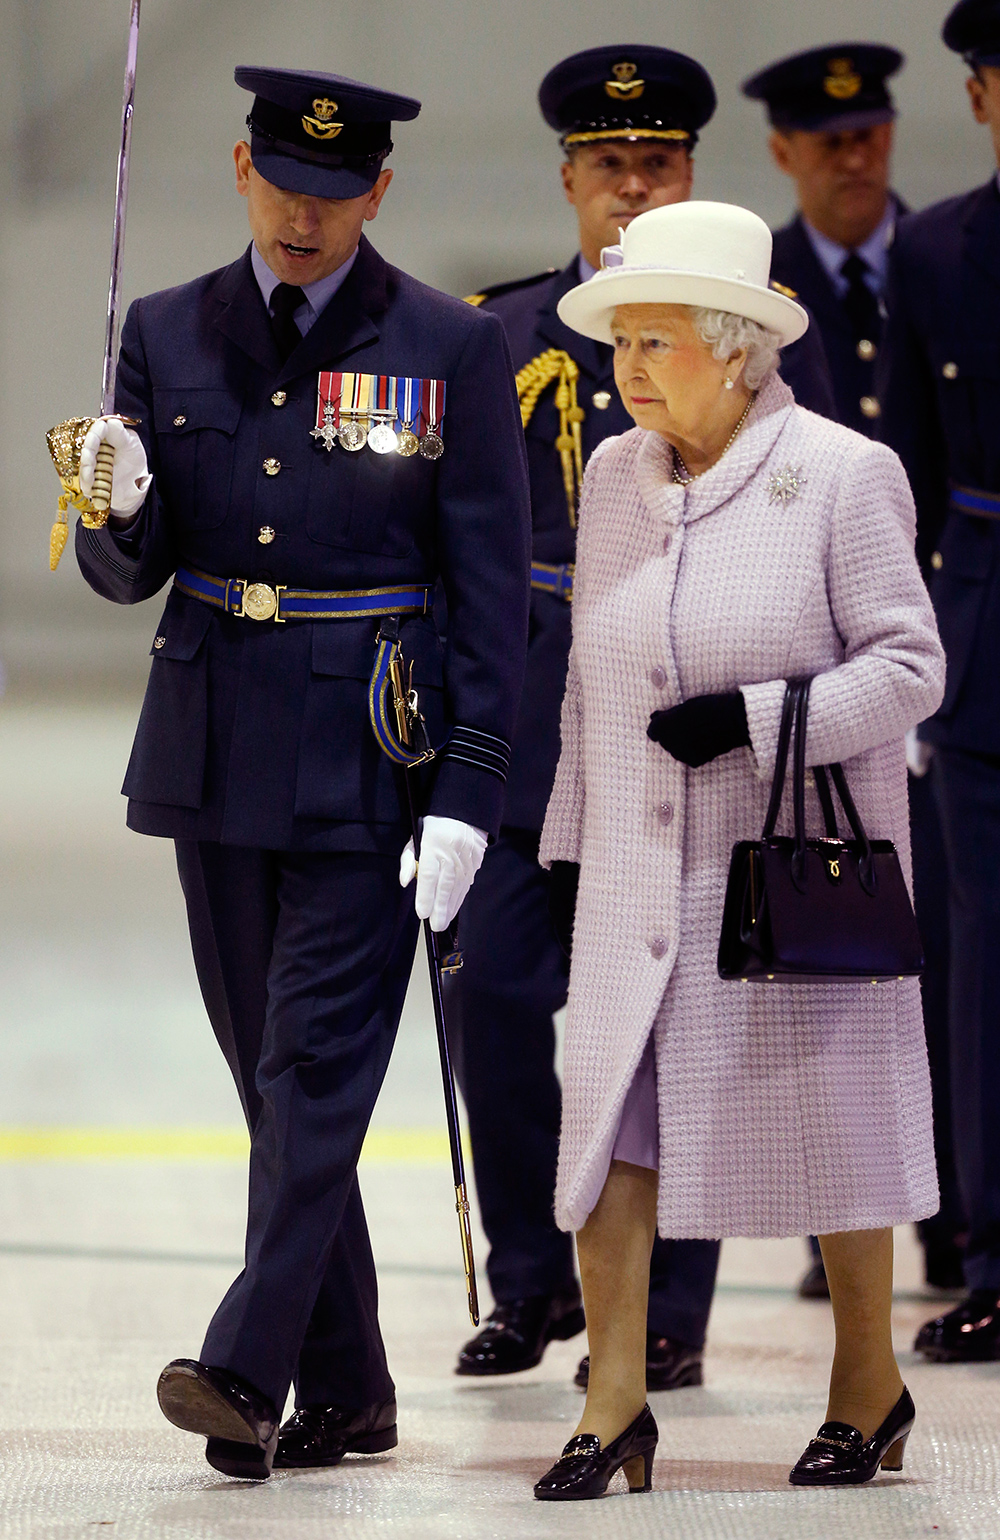 Lilac has always been one of the Queen's favourite colours to wear and she chose this lilac coat for a visit to RAF Lossiemouth in Scotland in 2014. Photo / Getty Images